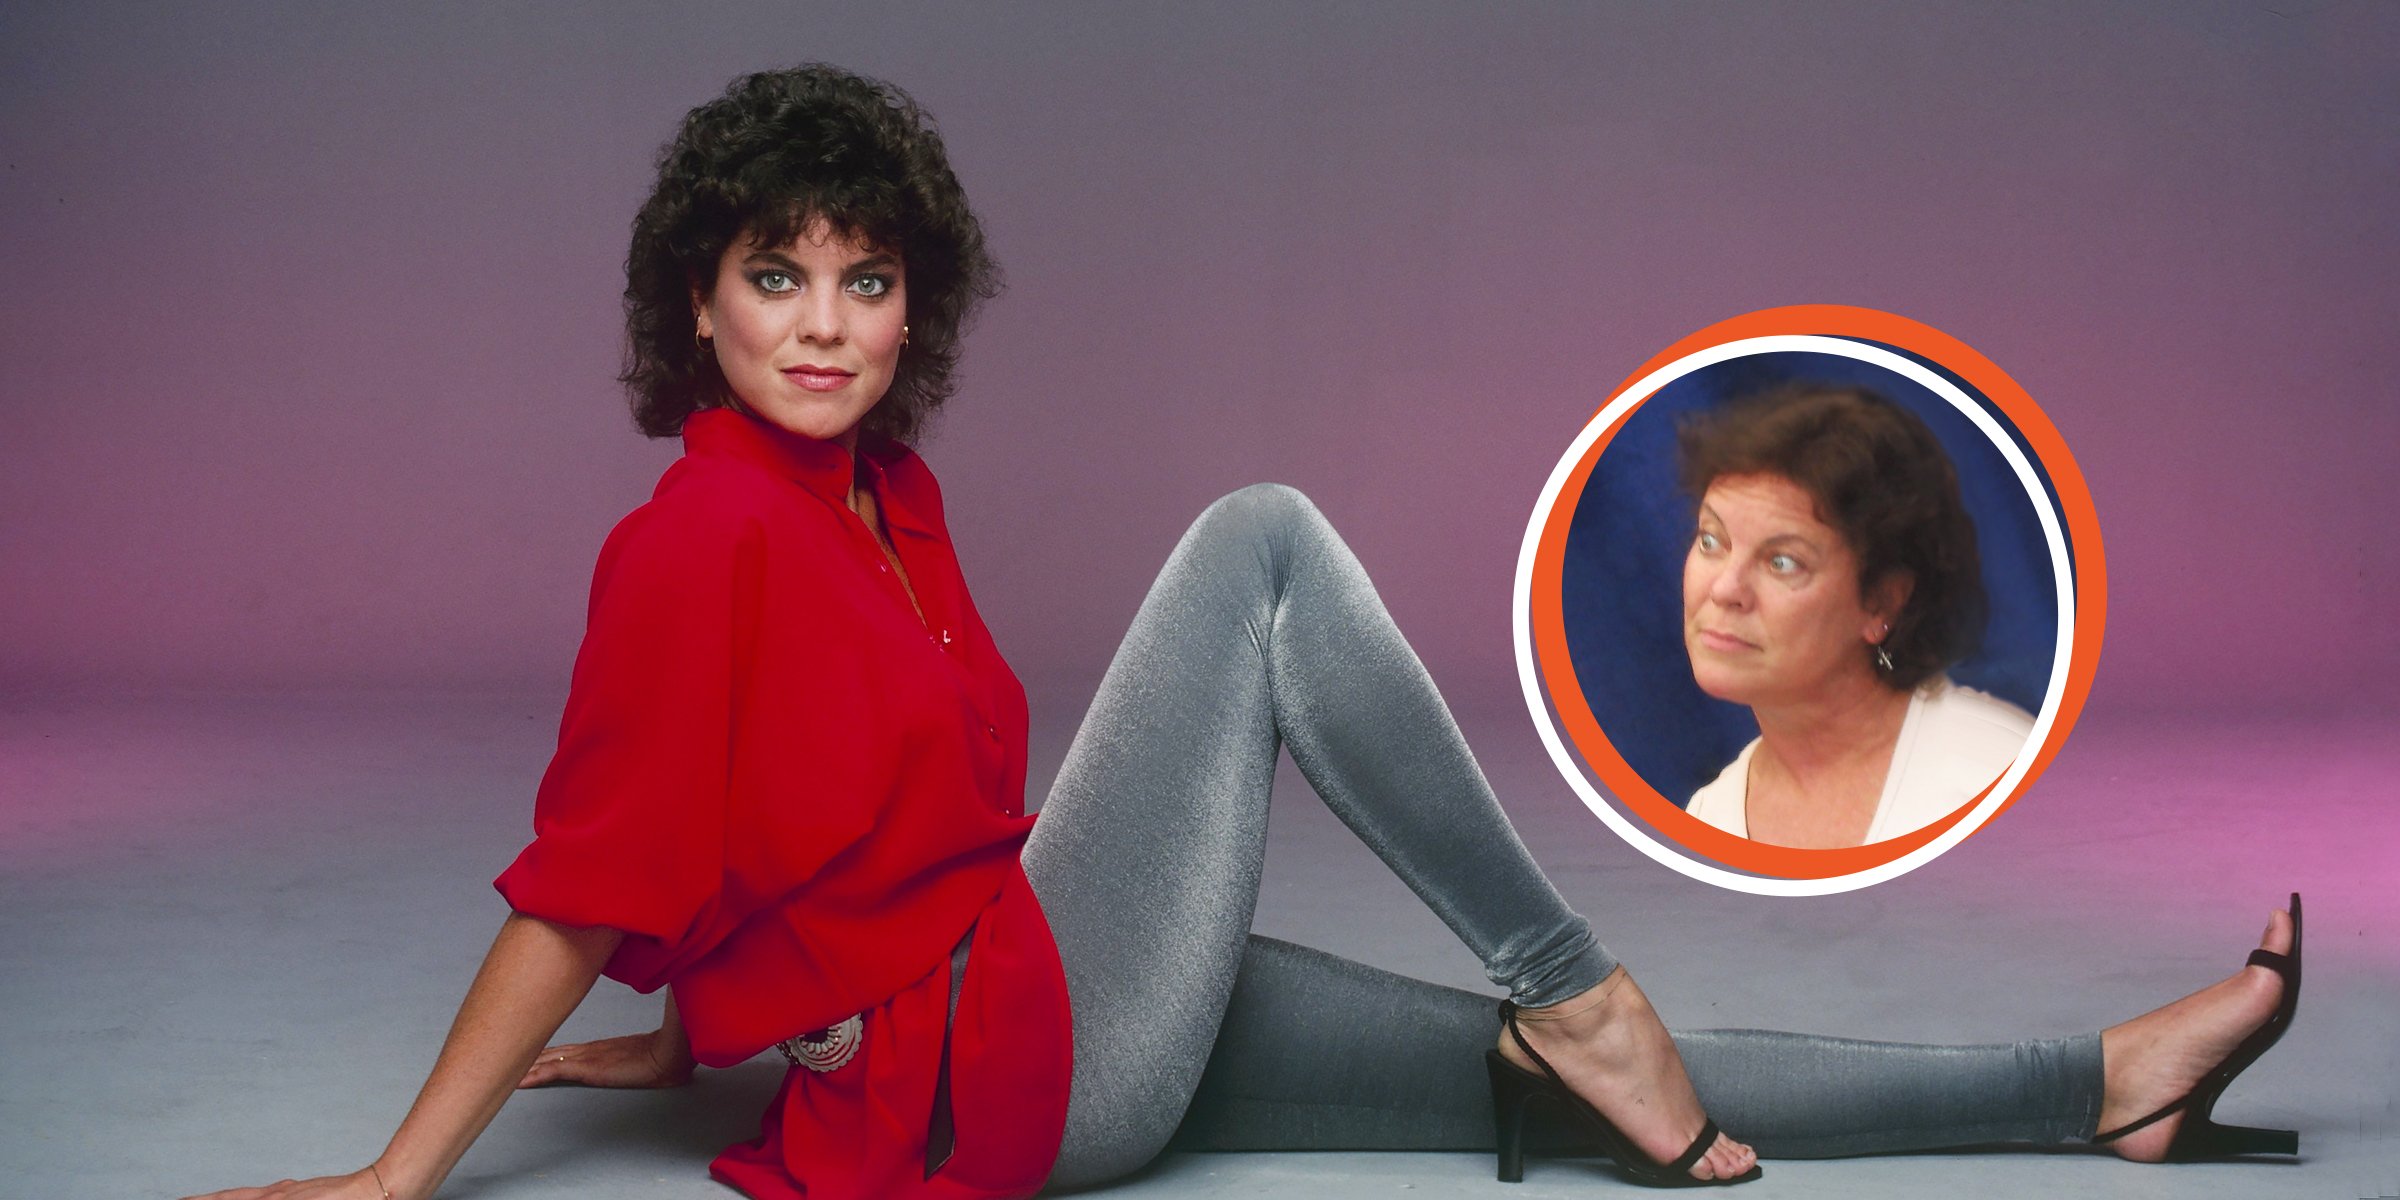 Erin Moran | Source: Getty Images | Wikimedia Commons / Wryspy